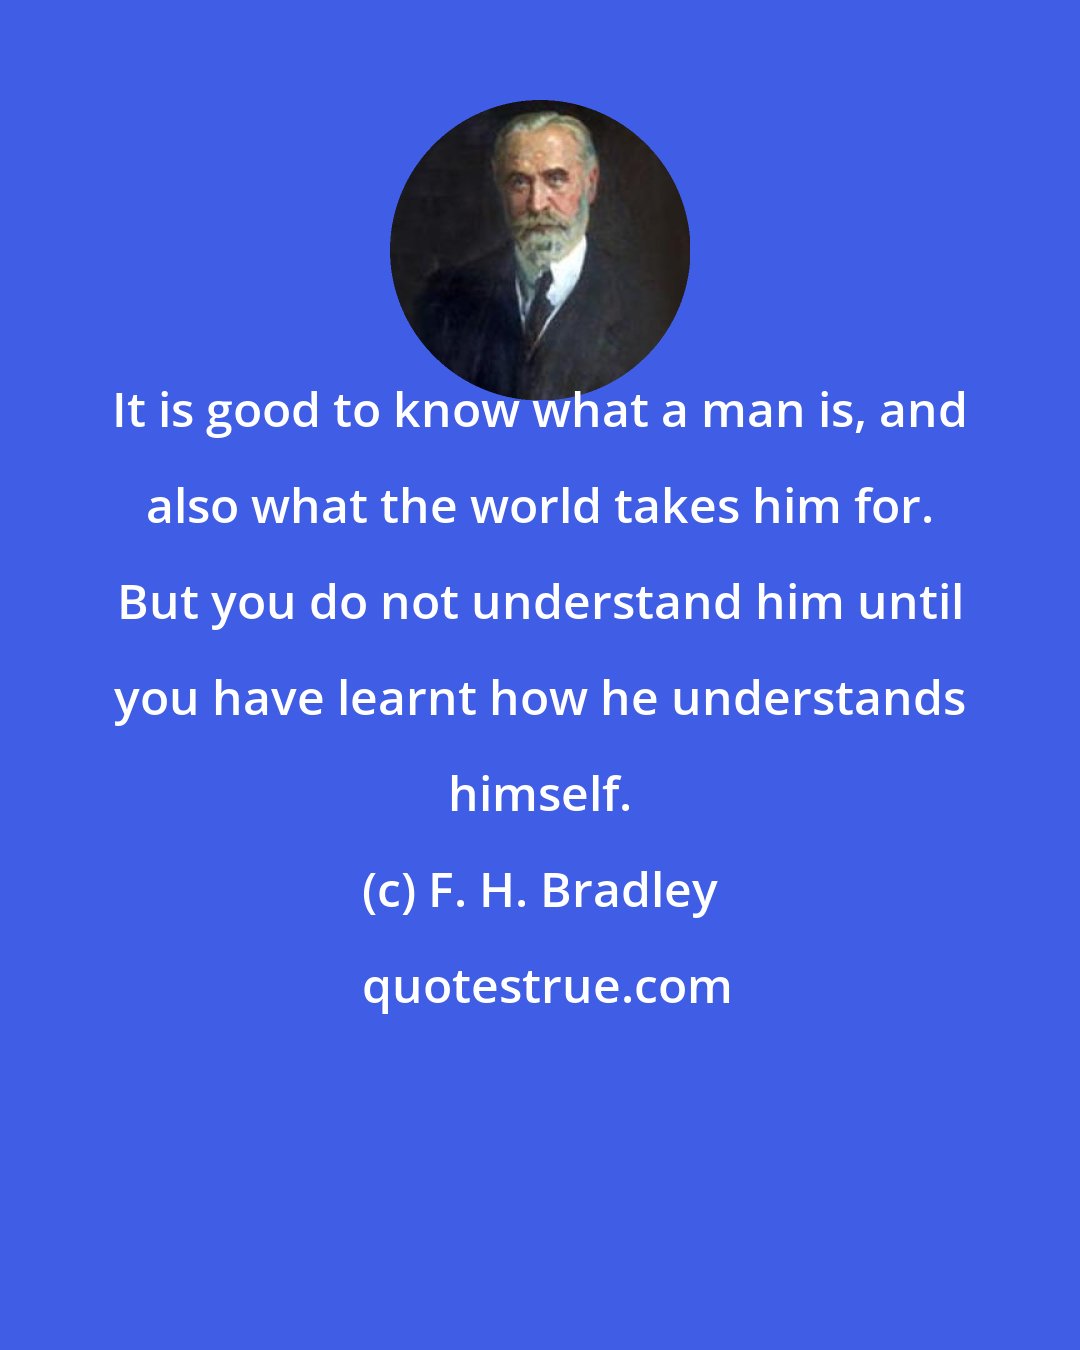 F. H. Bradley: It is good to know what a man is, and also what the world takes him for. But you do not understand him until you have learnt how he understands himself.